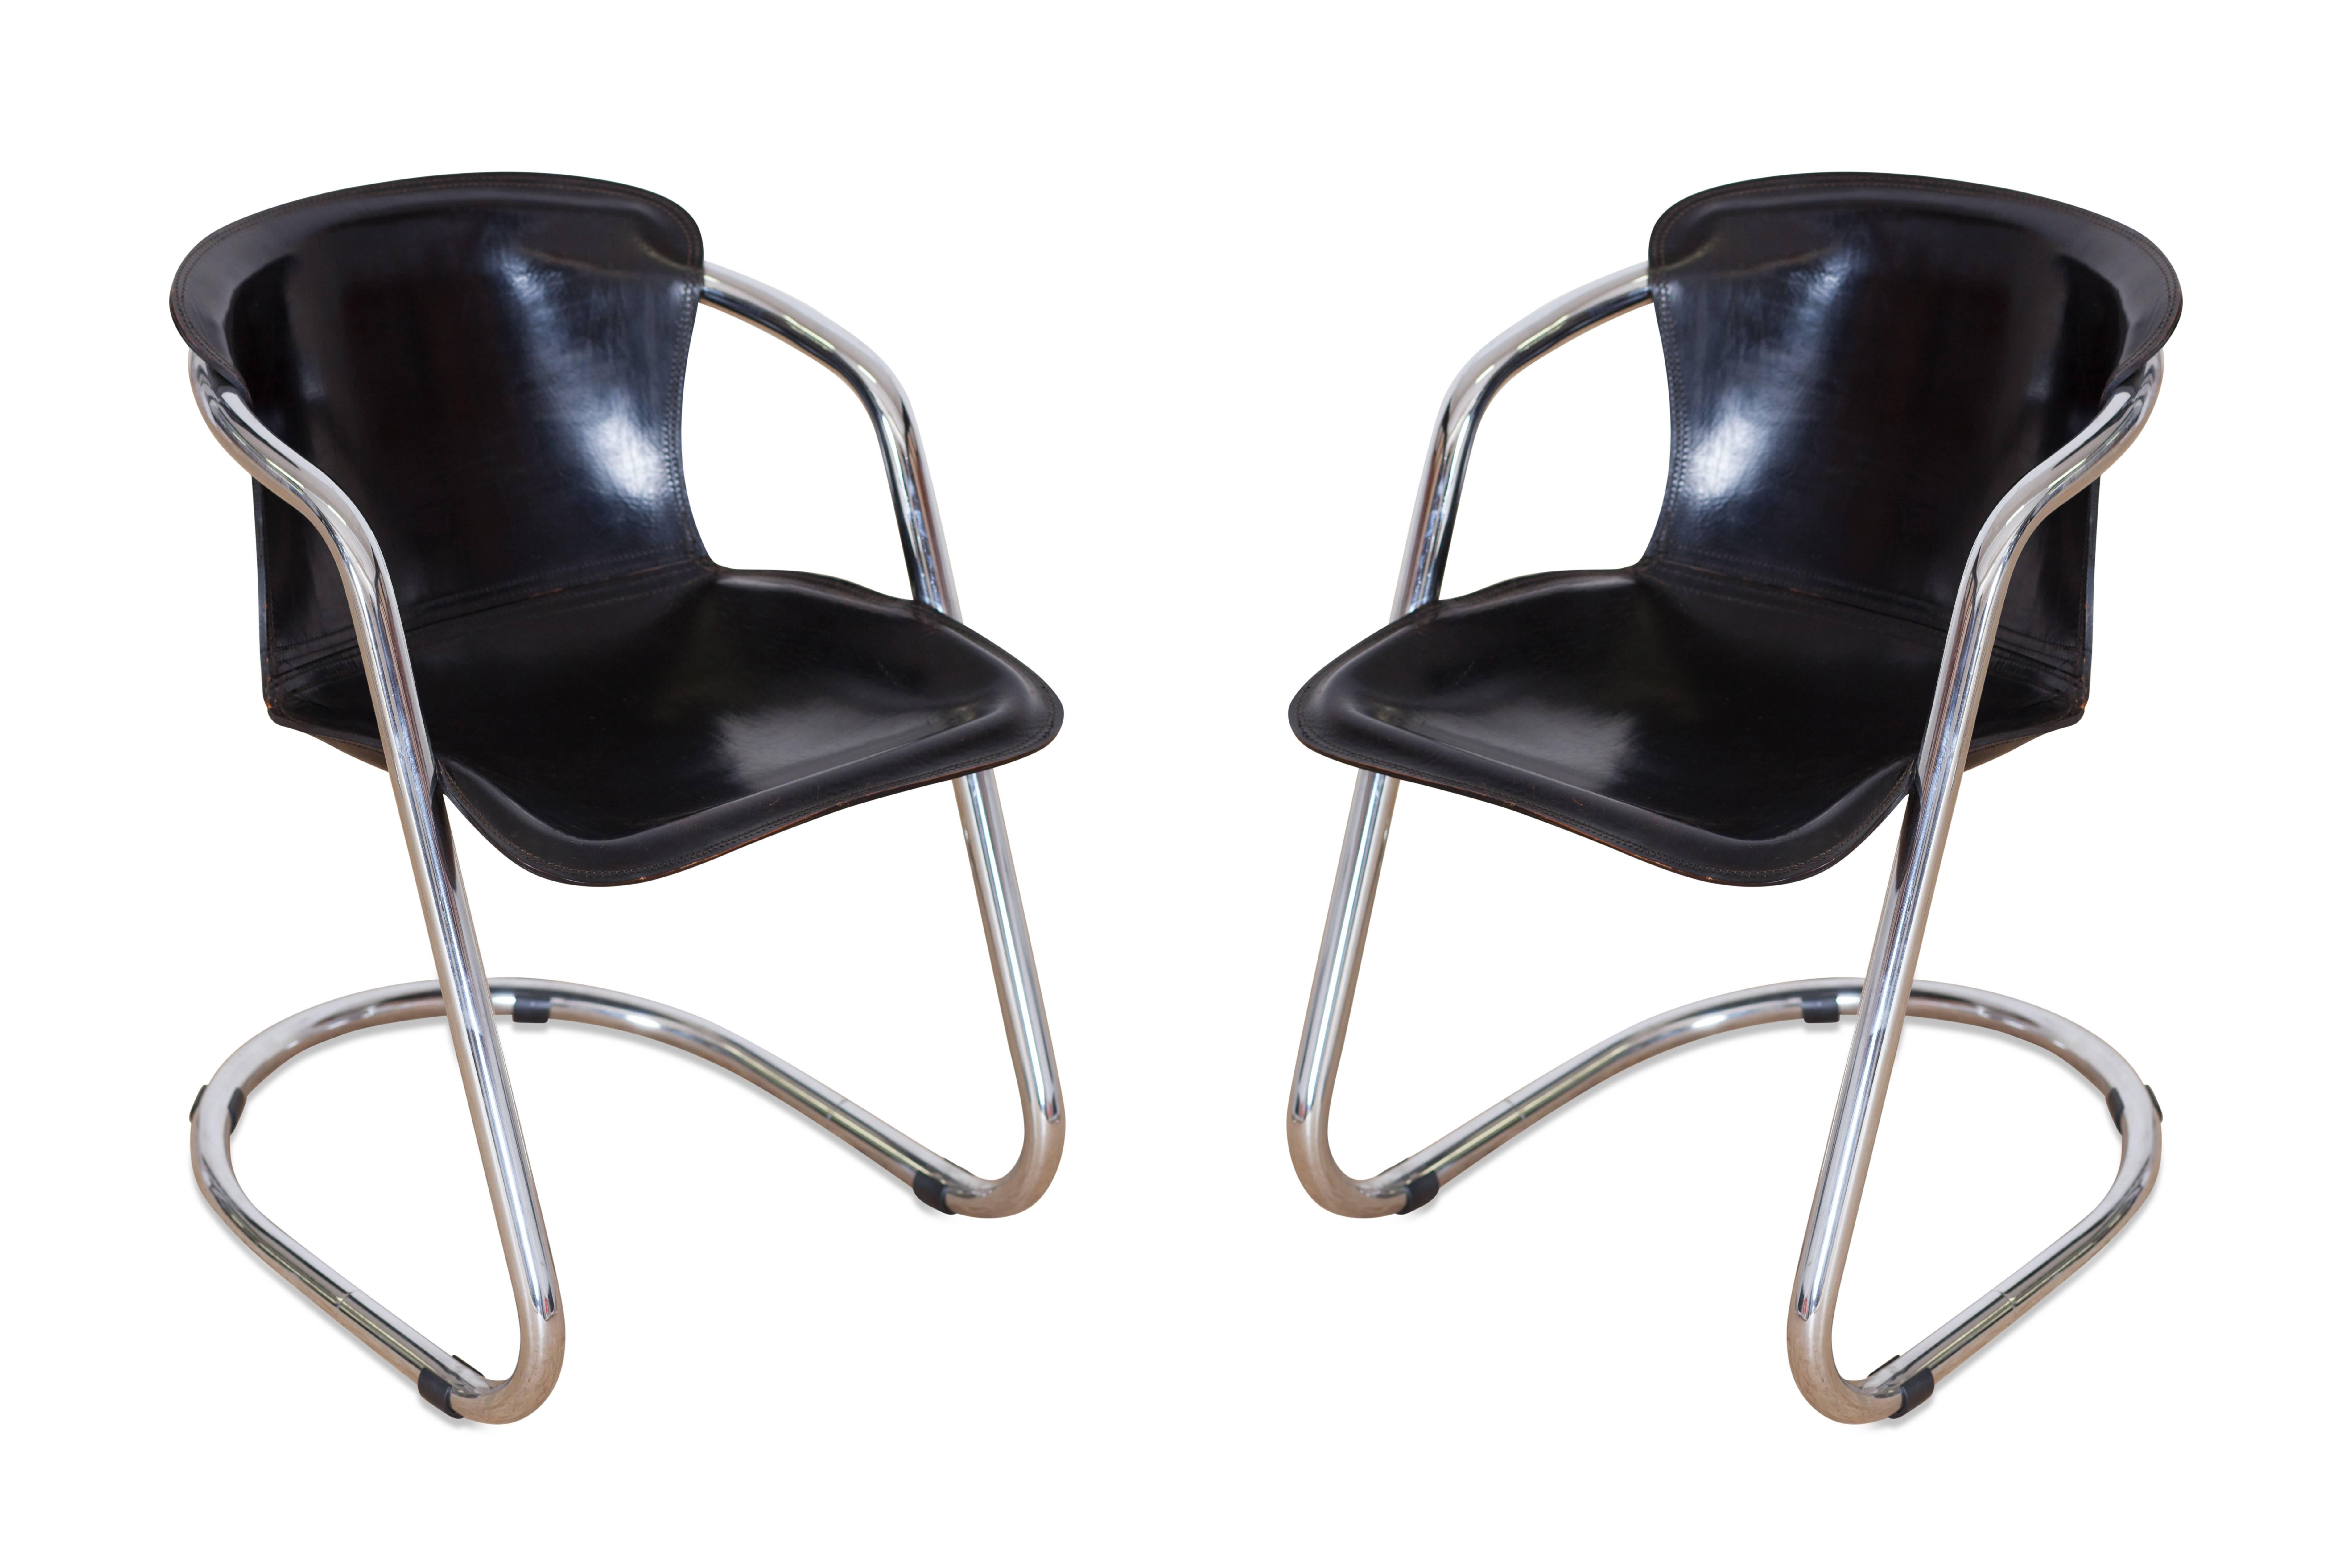 Late 20th Century Tubular Chrome Dining Chairs by Willy Rizzo for Cidue, Italy, 1970s